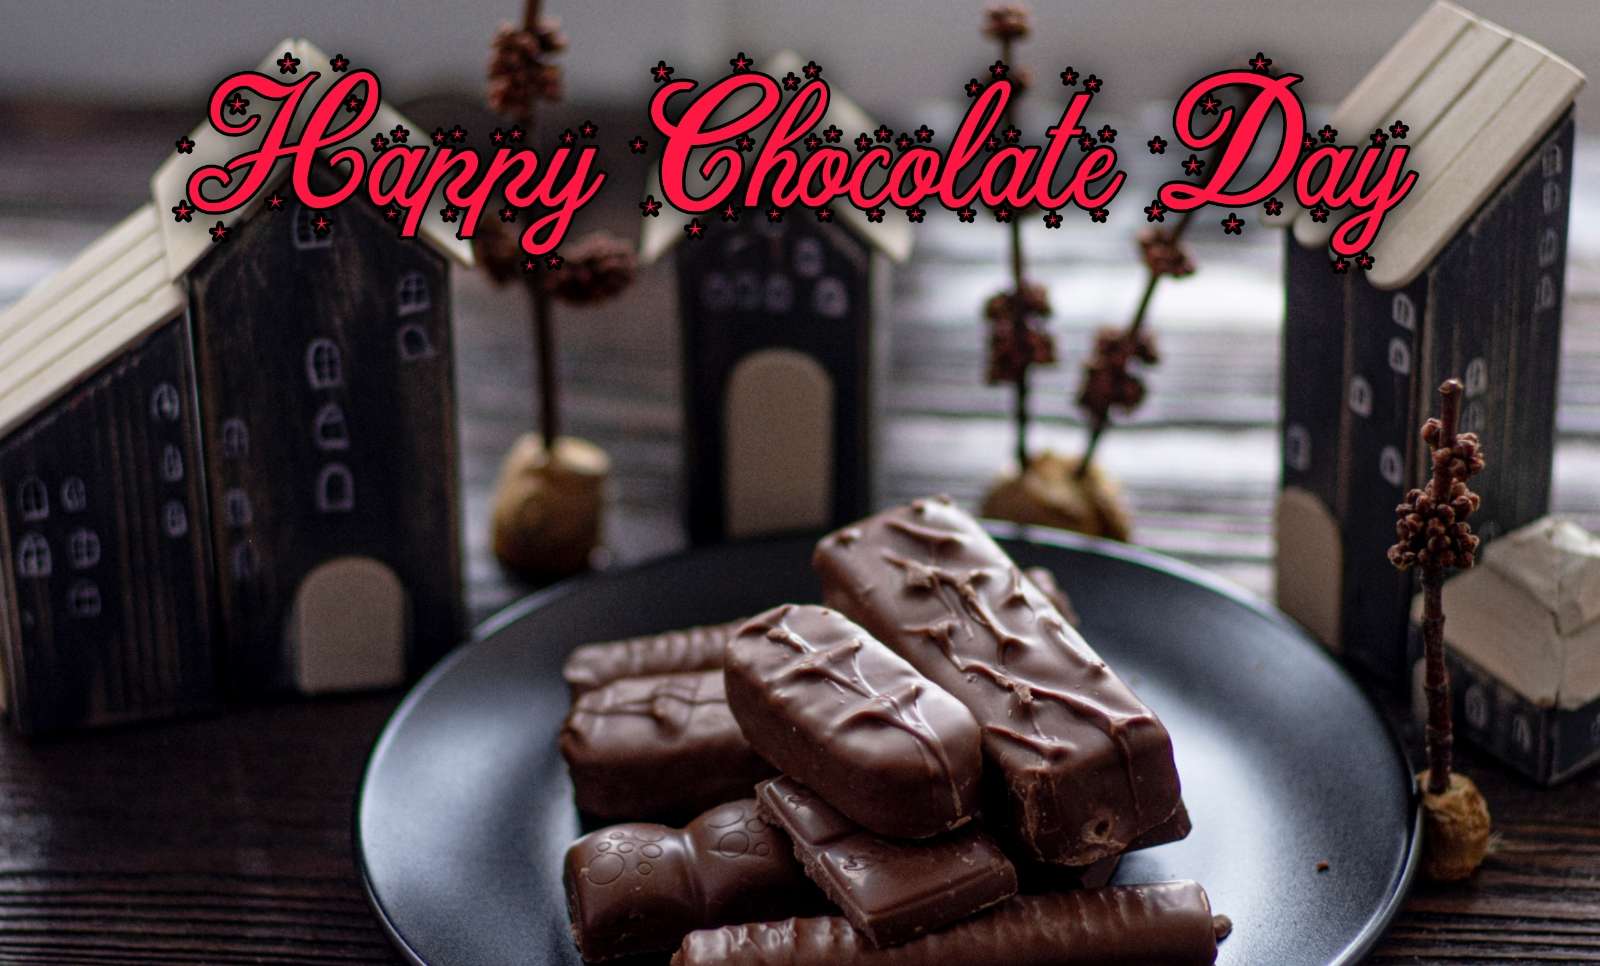 Happy Chocolate Day Wallpaper Download